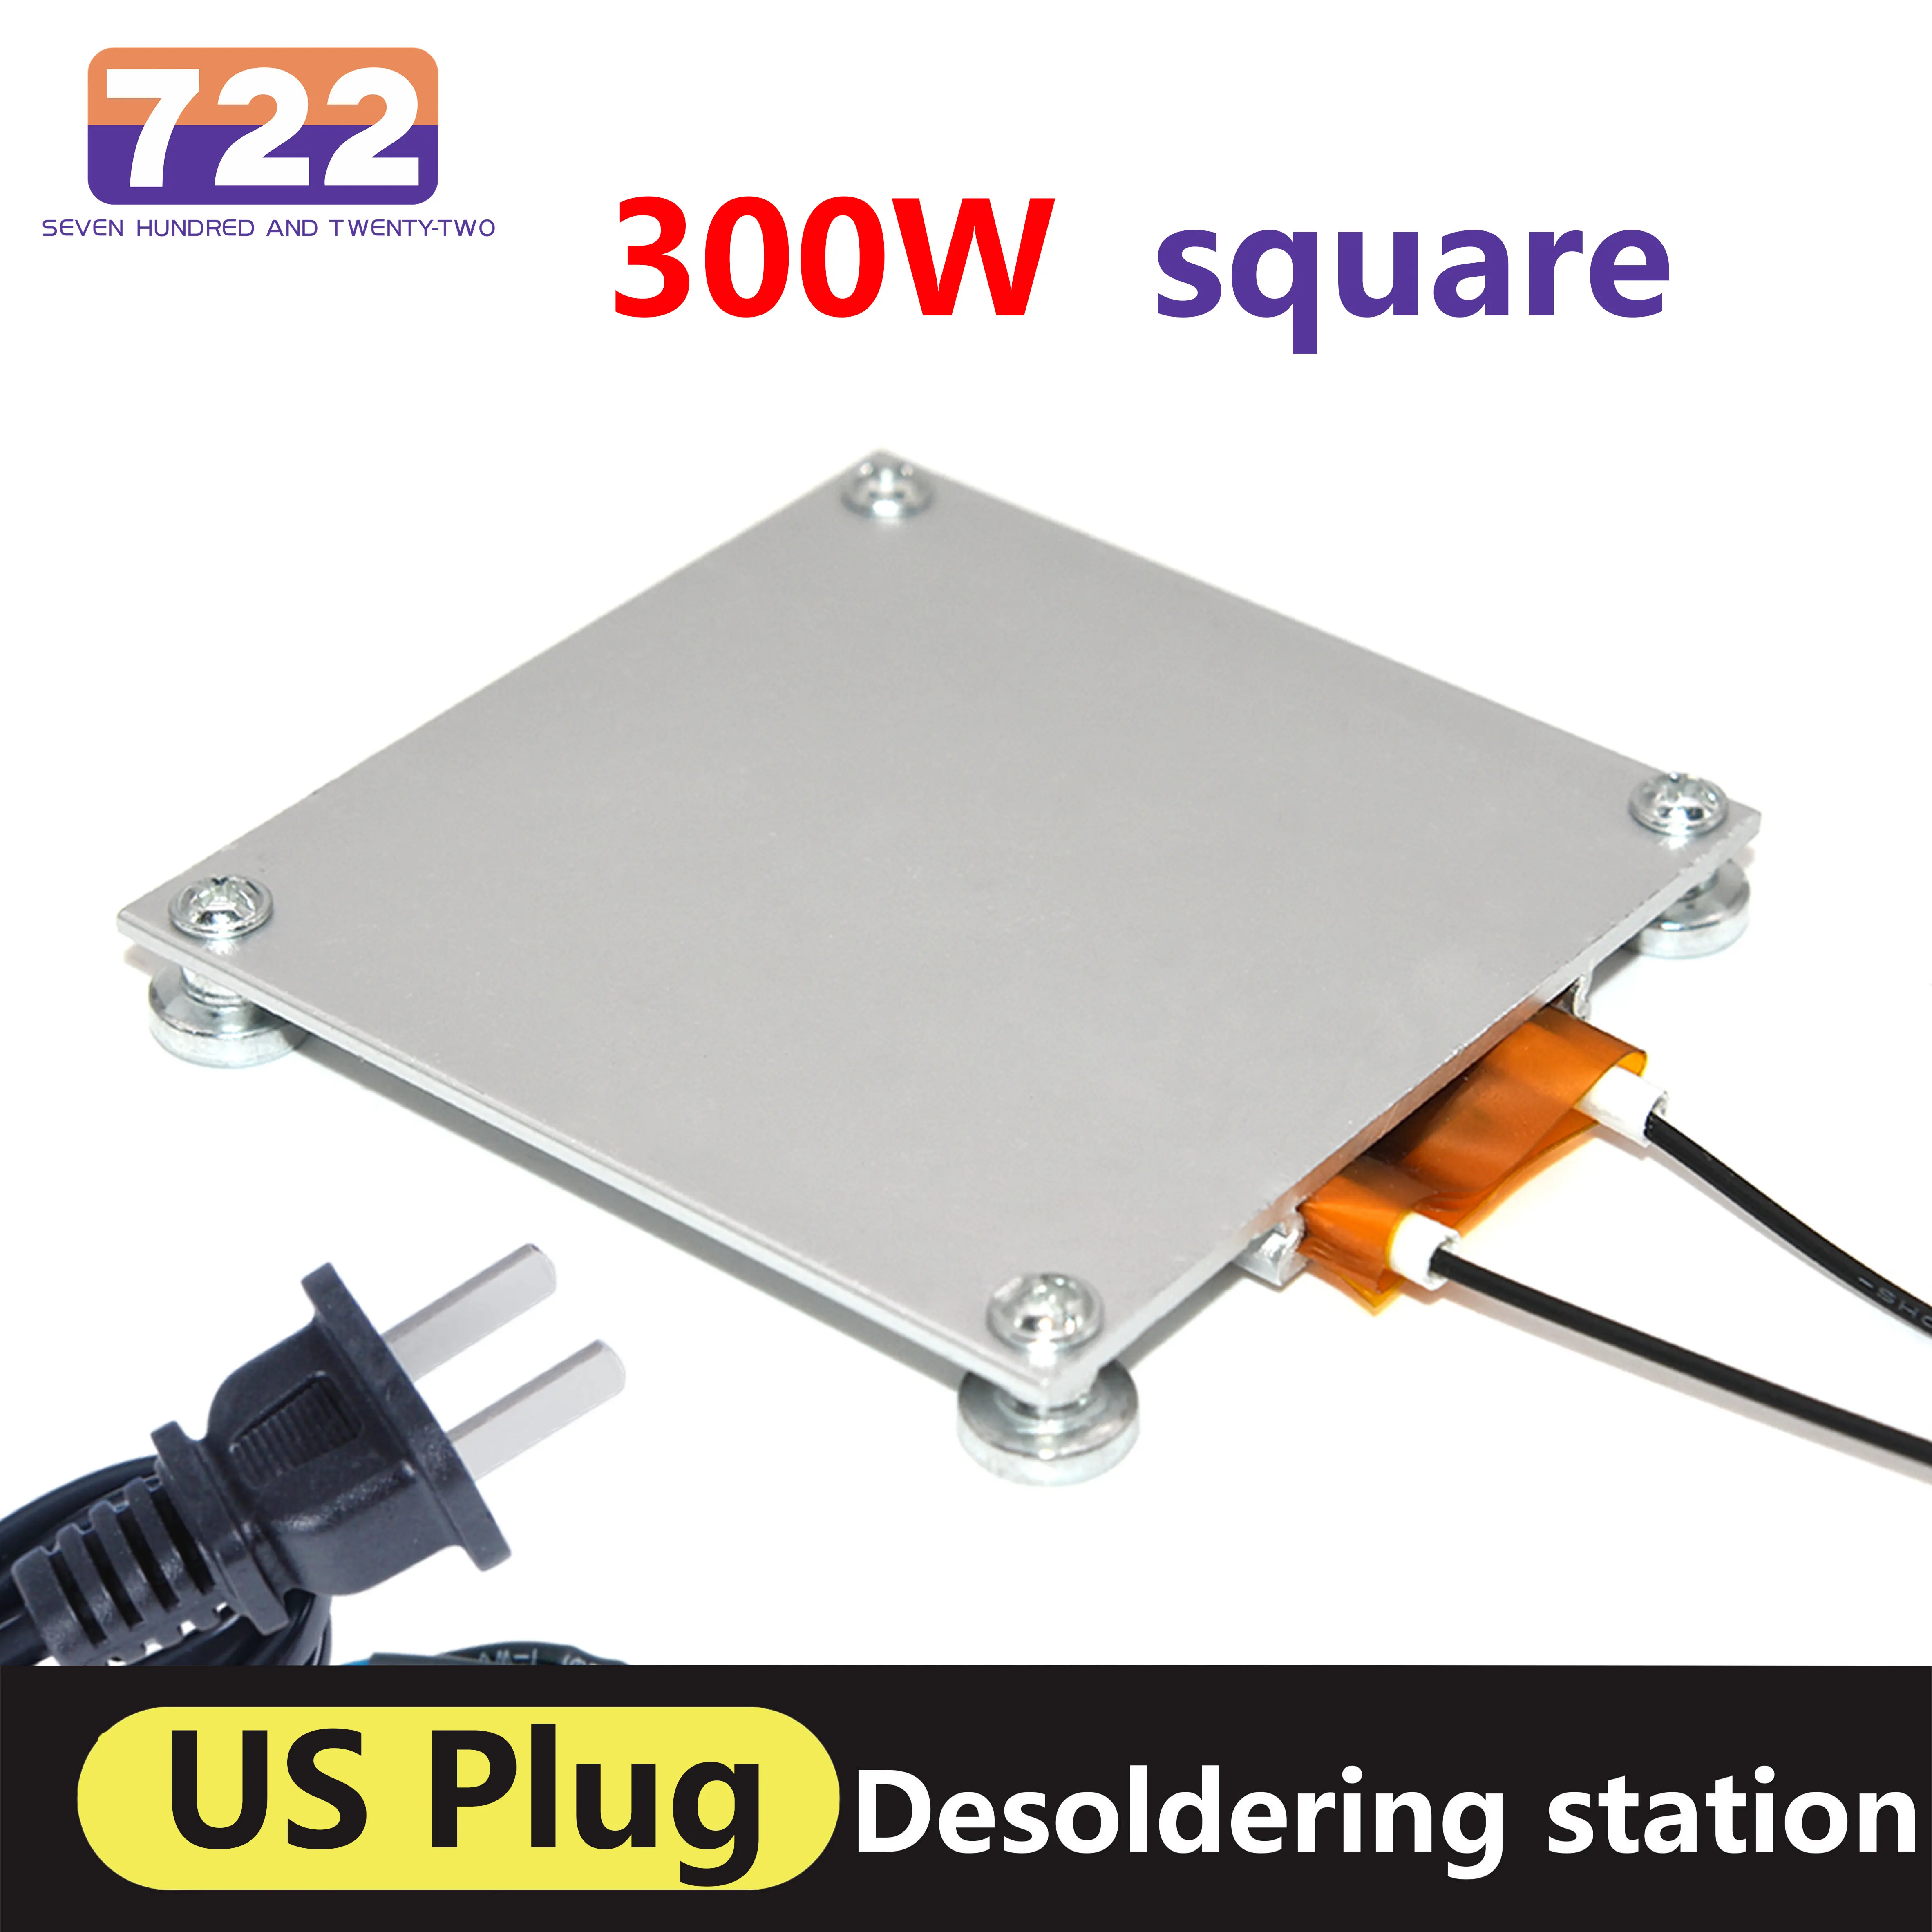 HD 722 70*70mm Rapid heating LED Lamp Remover Fast Heating Welding Solder Station Aluminum Heating Plate 260 Degree 300W US Plug h 722 heating soldering chip rectangle aluminum desoldering bga led lamp desoldering station ptc split plate 300w 400w 500w 600w